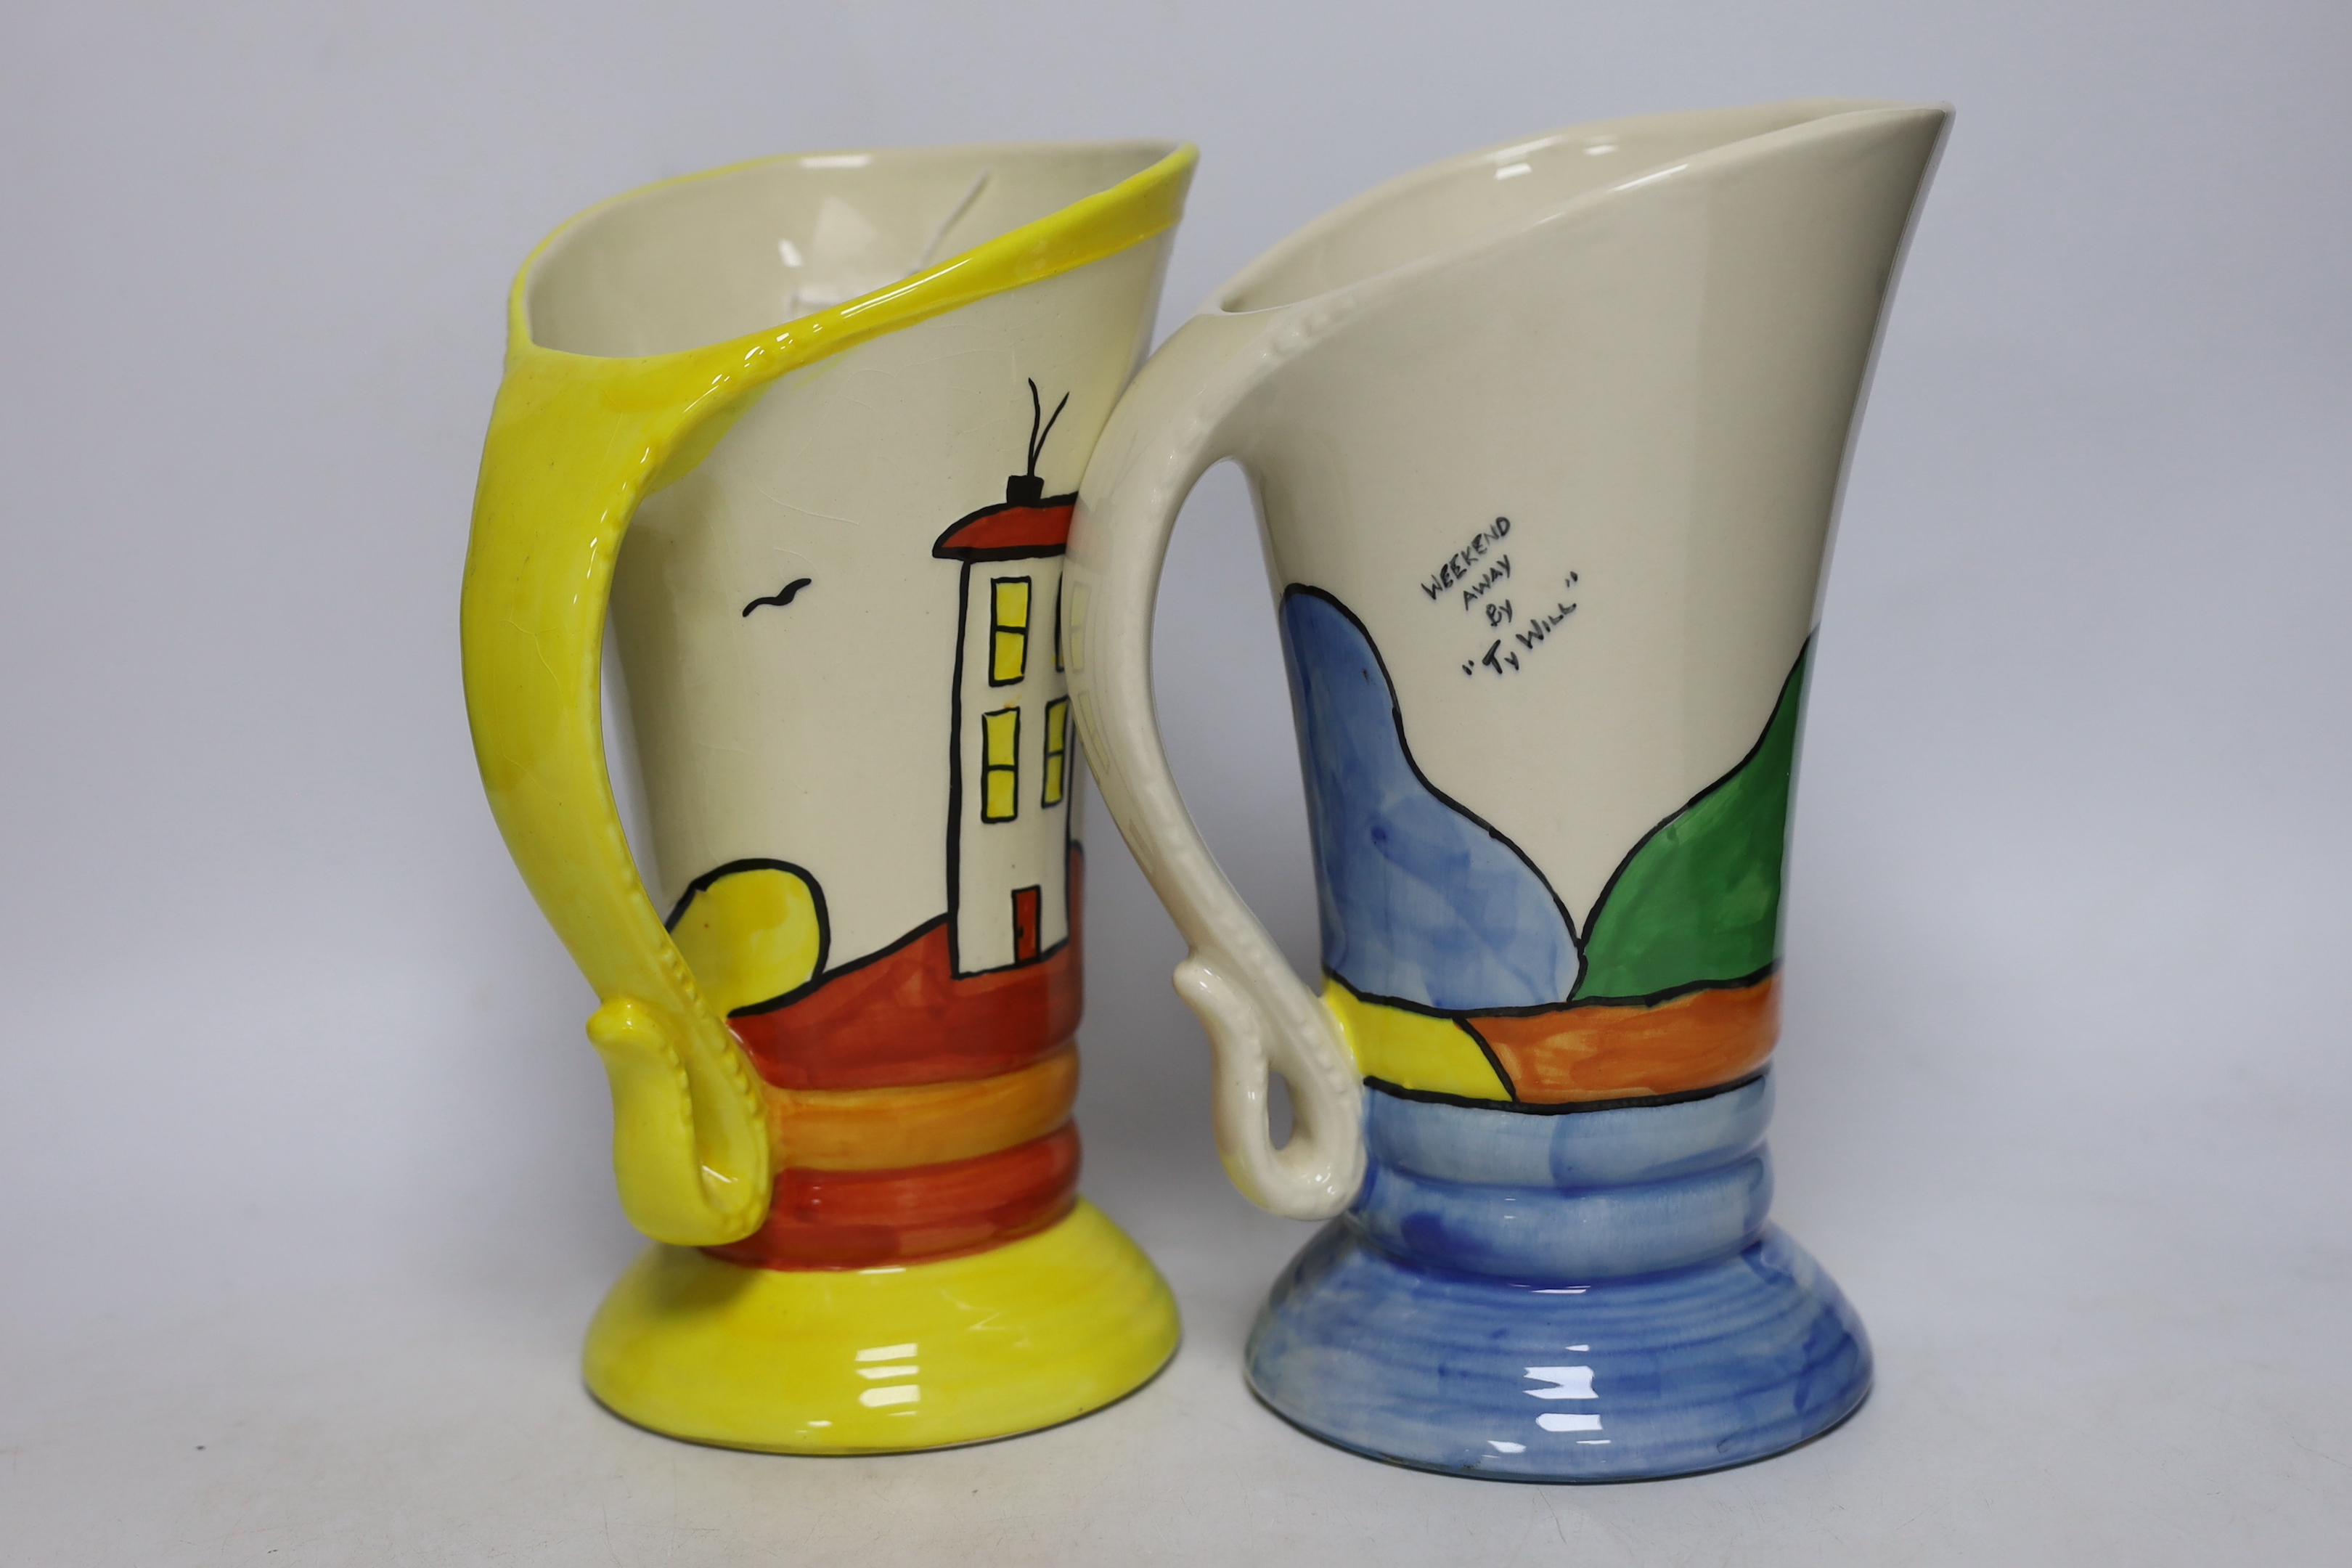 A Bernadette Eve Staffordshire jug, hand painted by Ty Will ‘Gardens’ and a similar Devon Ware jug, both in Clarice Cliff style, 23cm